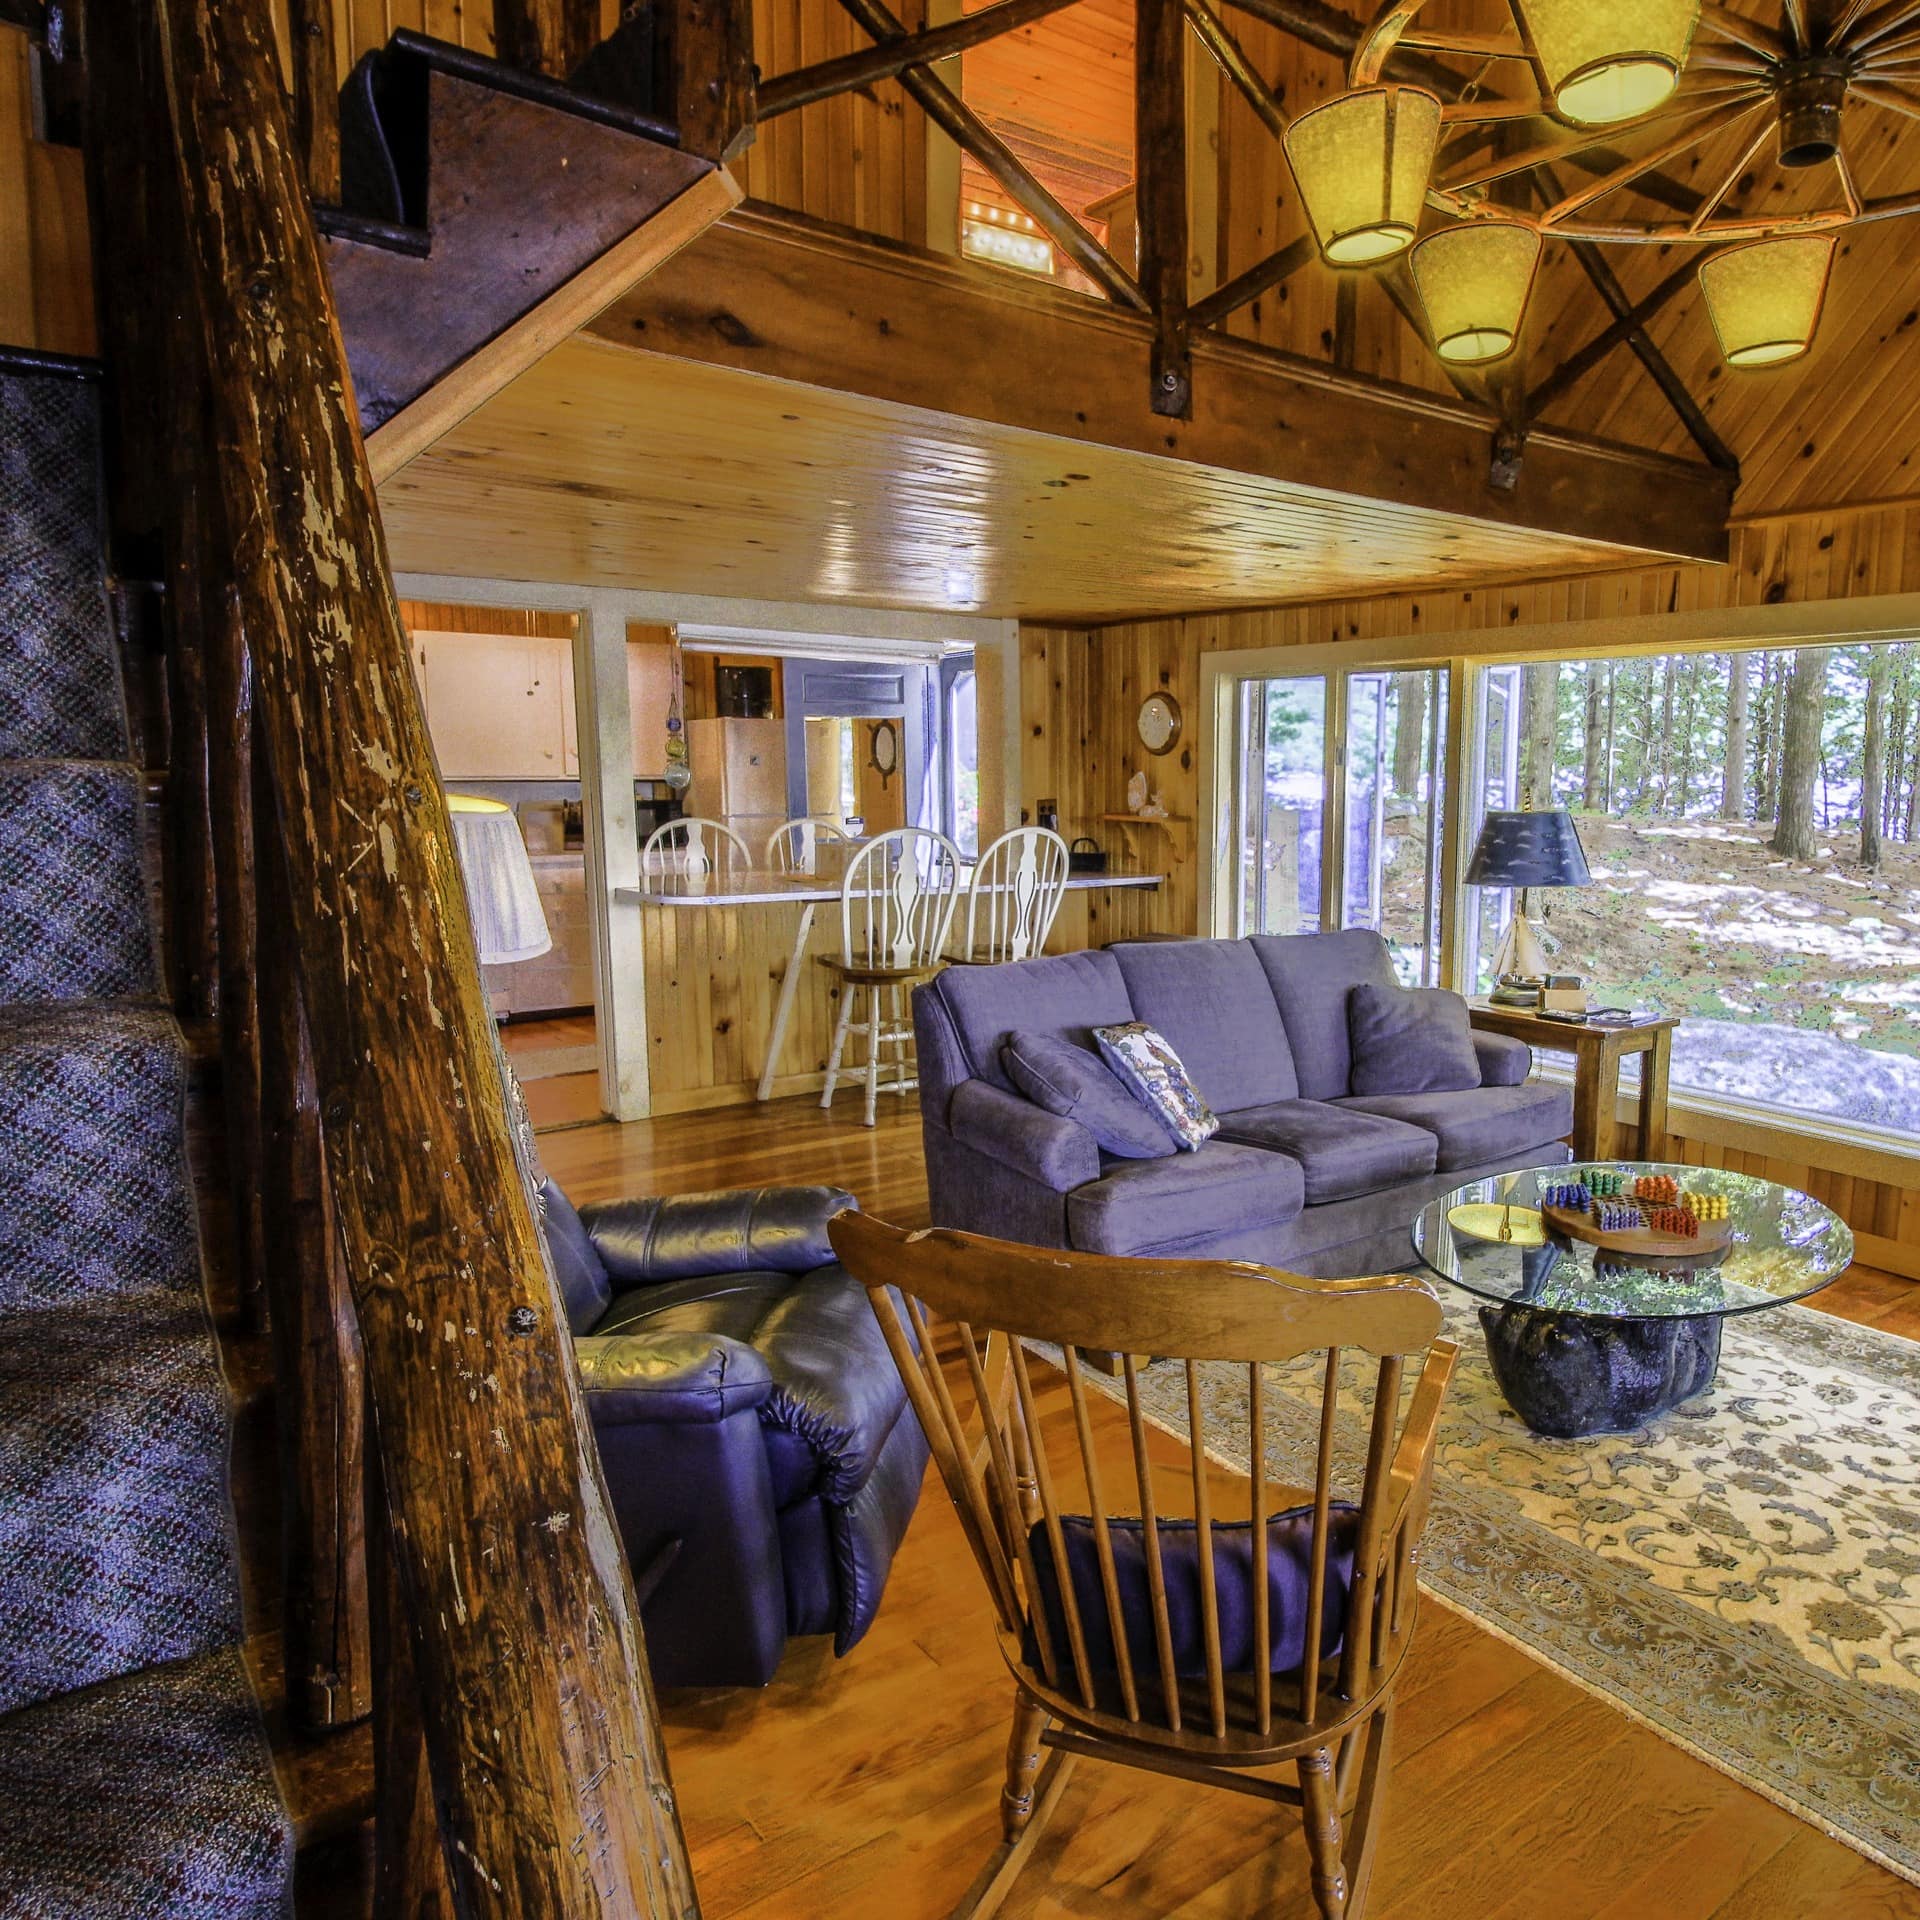 This cabin rental near Acadia National Park features hardwood interiors, colorful furnishings, and large windows offering views of the surrounding woods